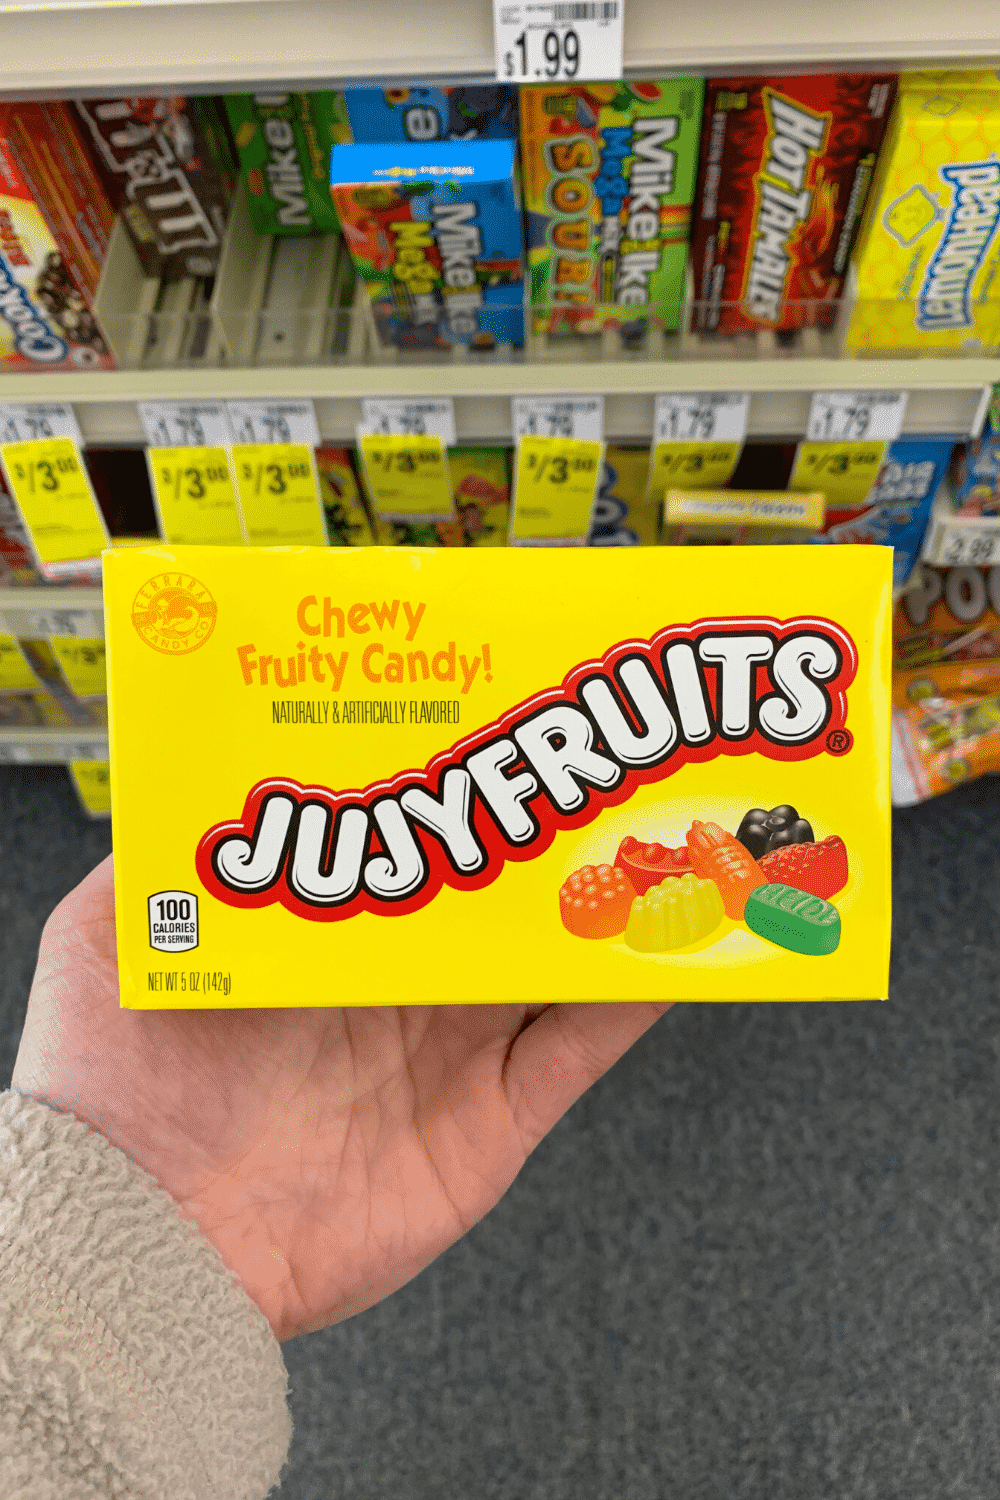 A hand holding a box of Jujyfruits